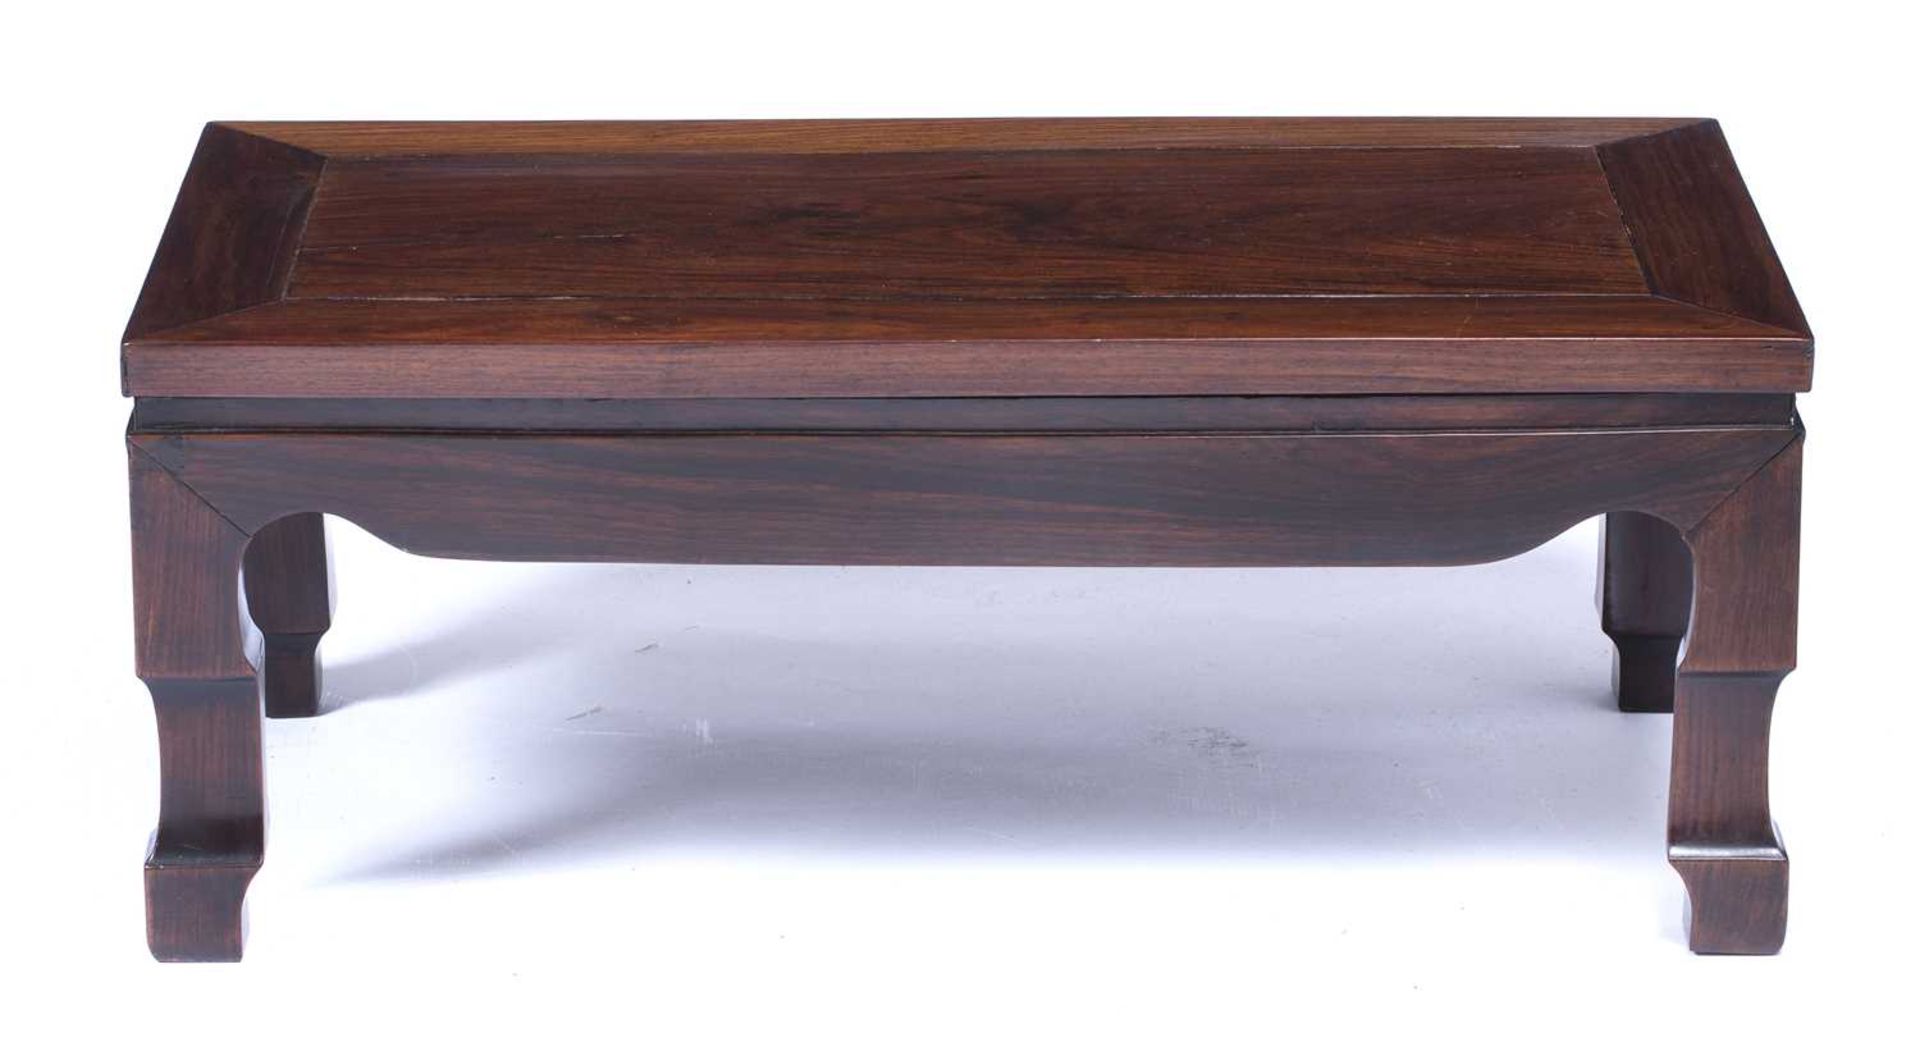 Hardwood carved 'Kang' table Chinese, with stylised shaped legs, 76.5cm across x 30.5cm high x - Image 4 of 5